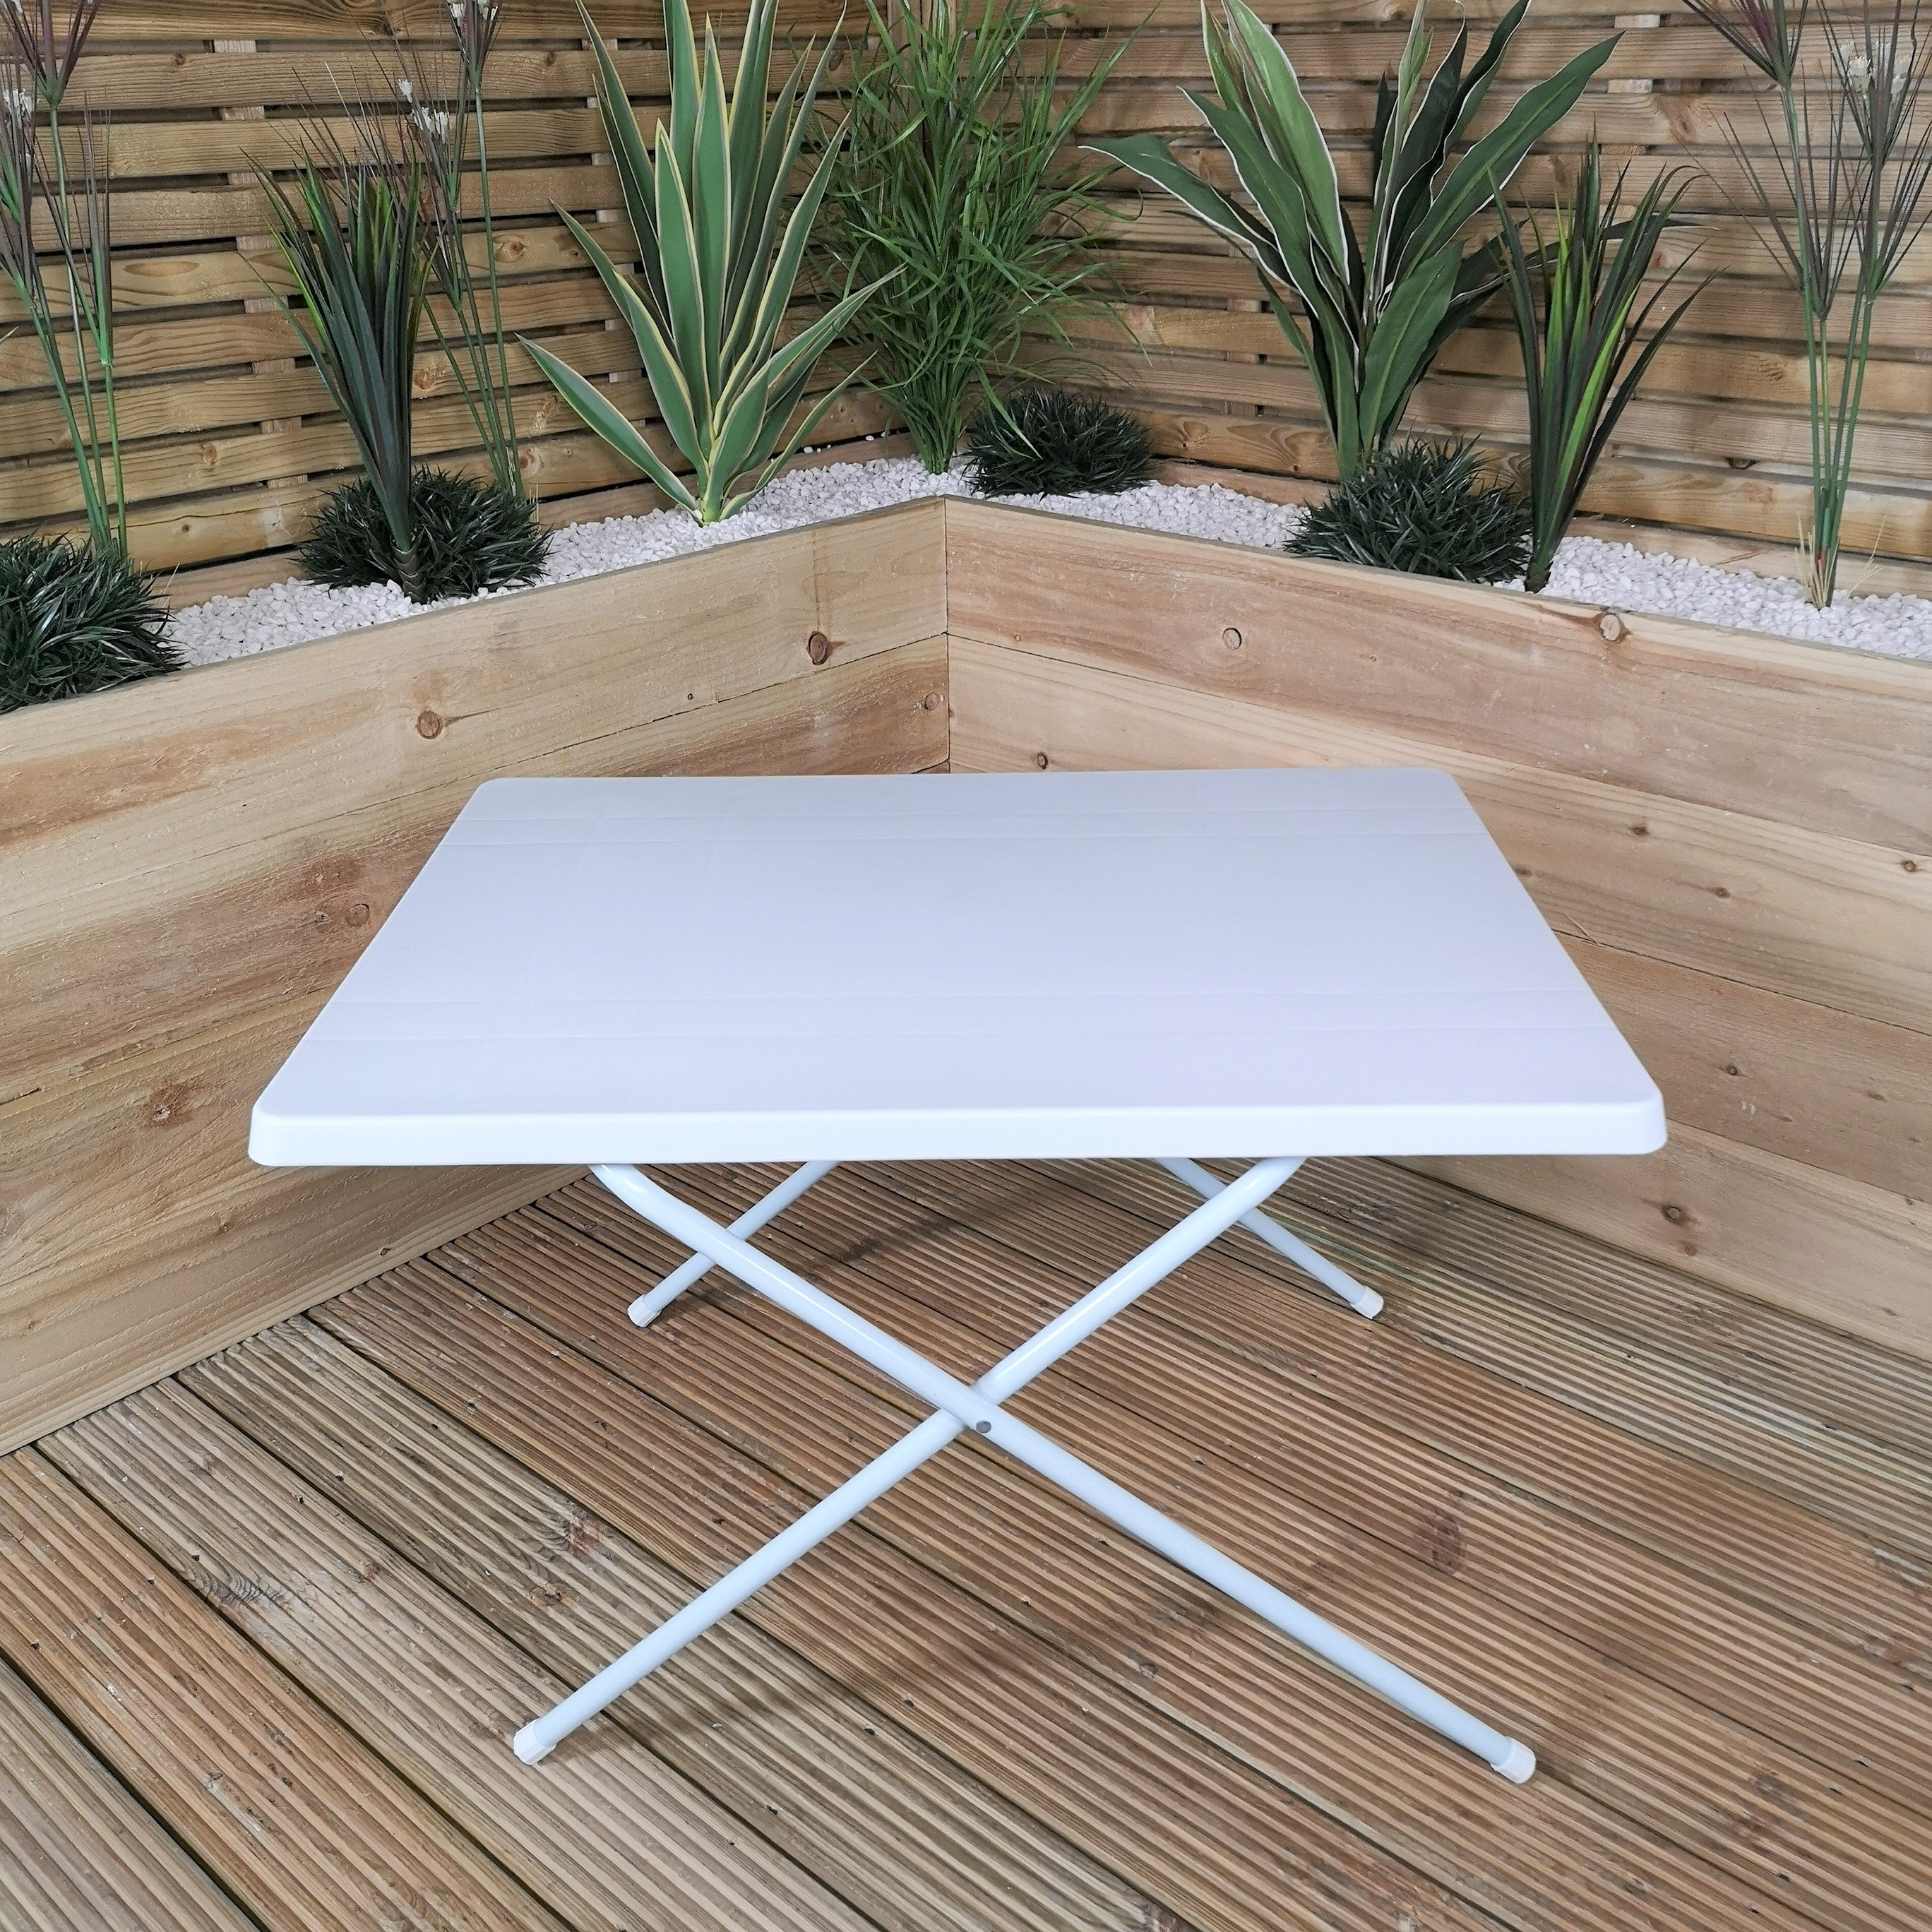 62cm White Large Lightweight Folding Outdoor Camping Table